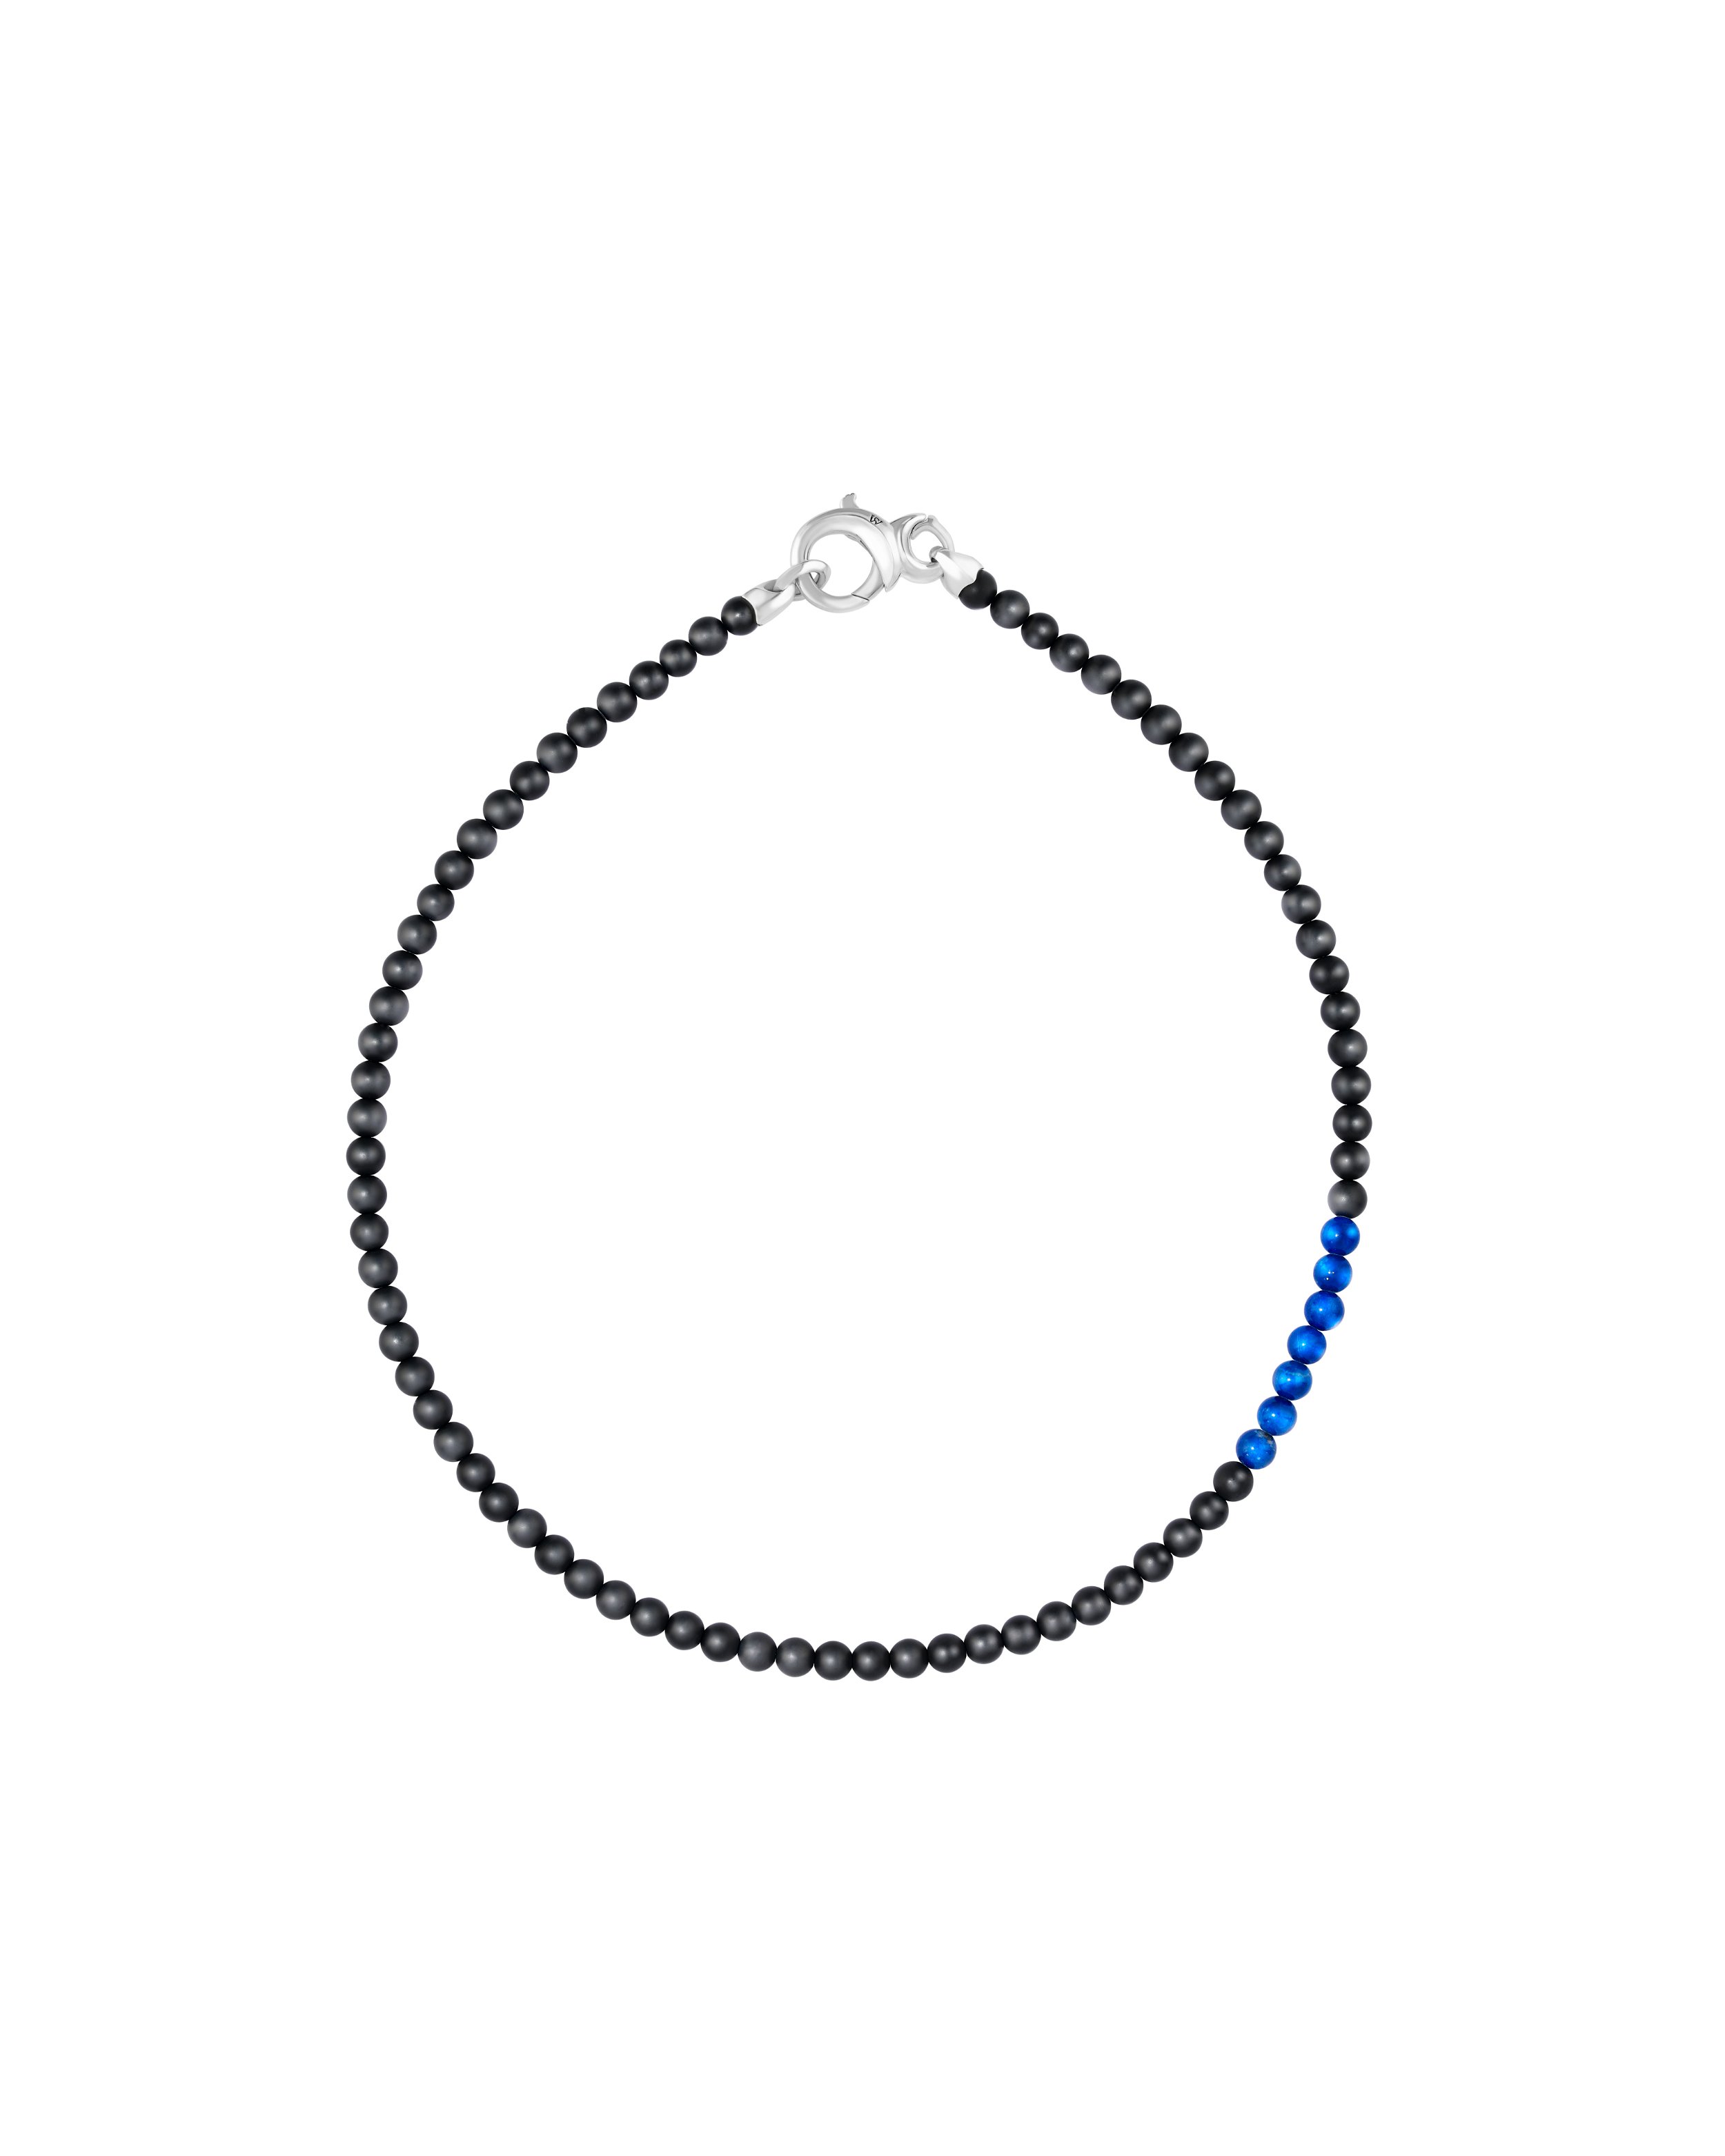 Thorn Addiction Bead Necklace with Matte Black Onyx and Lapis in Sterling Silver - 20"